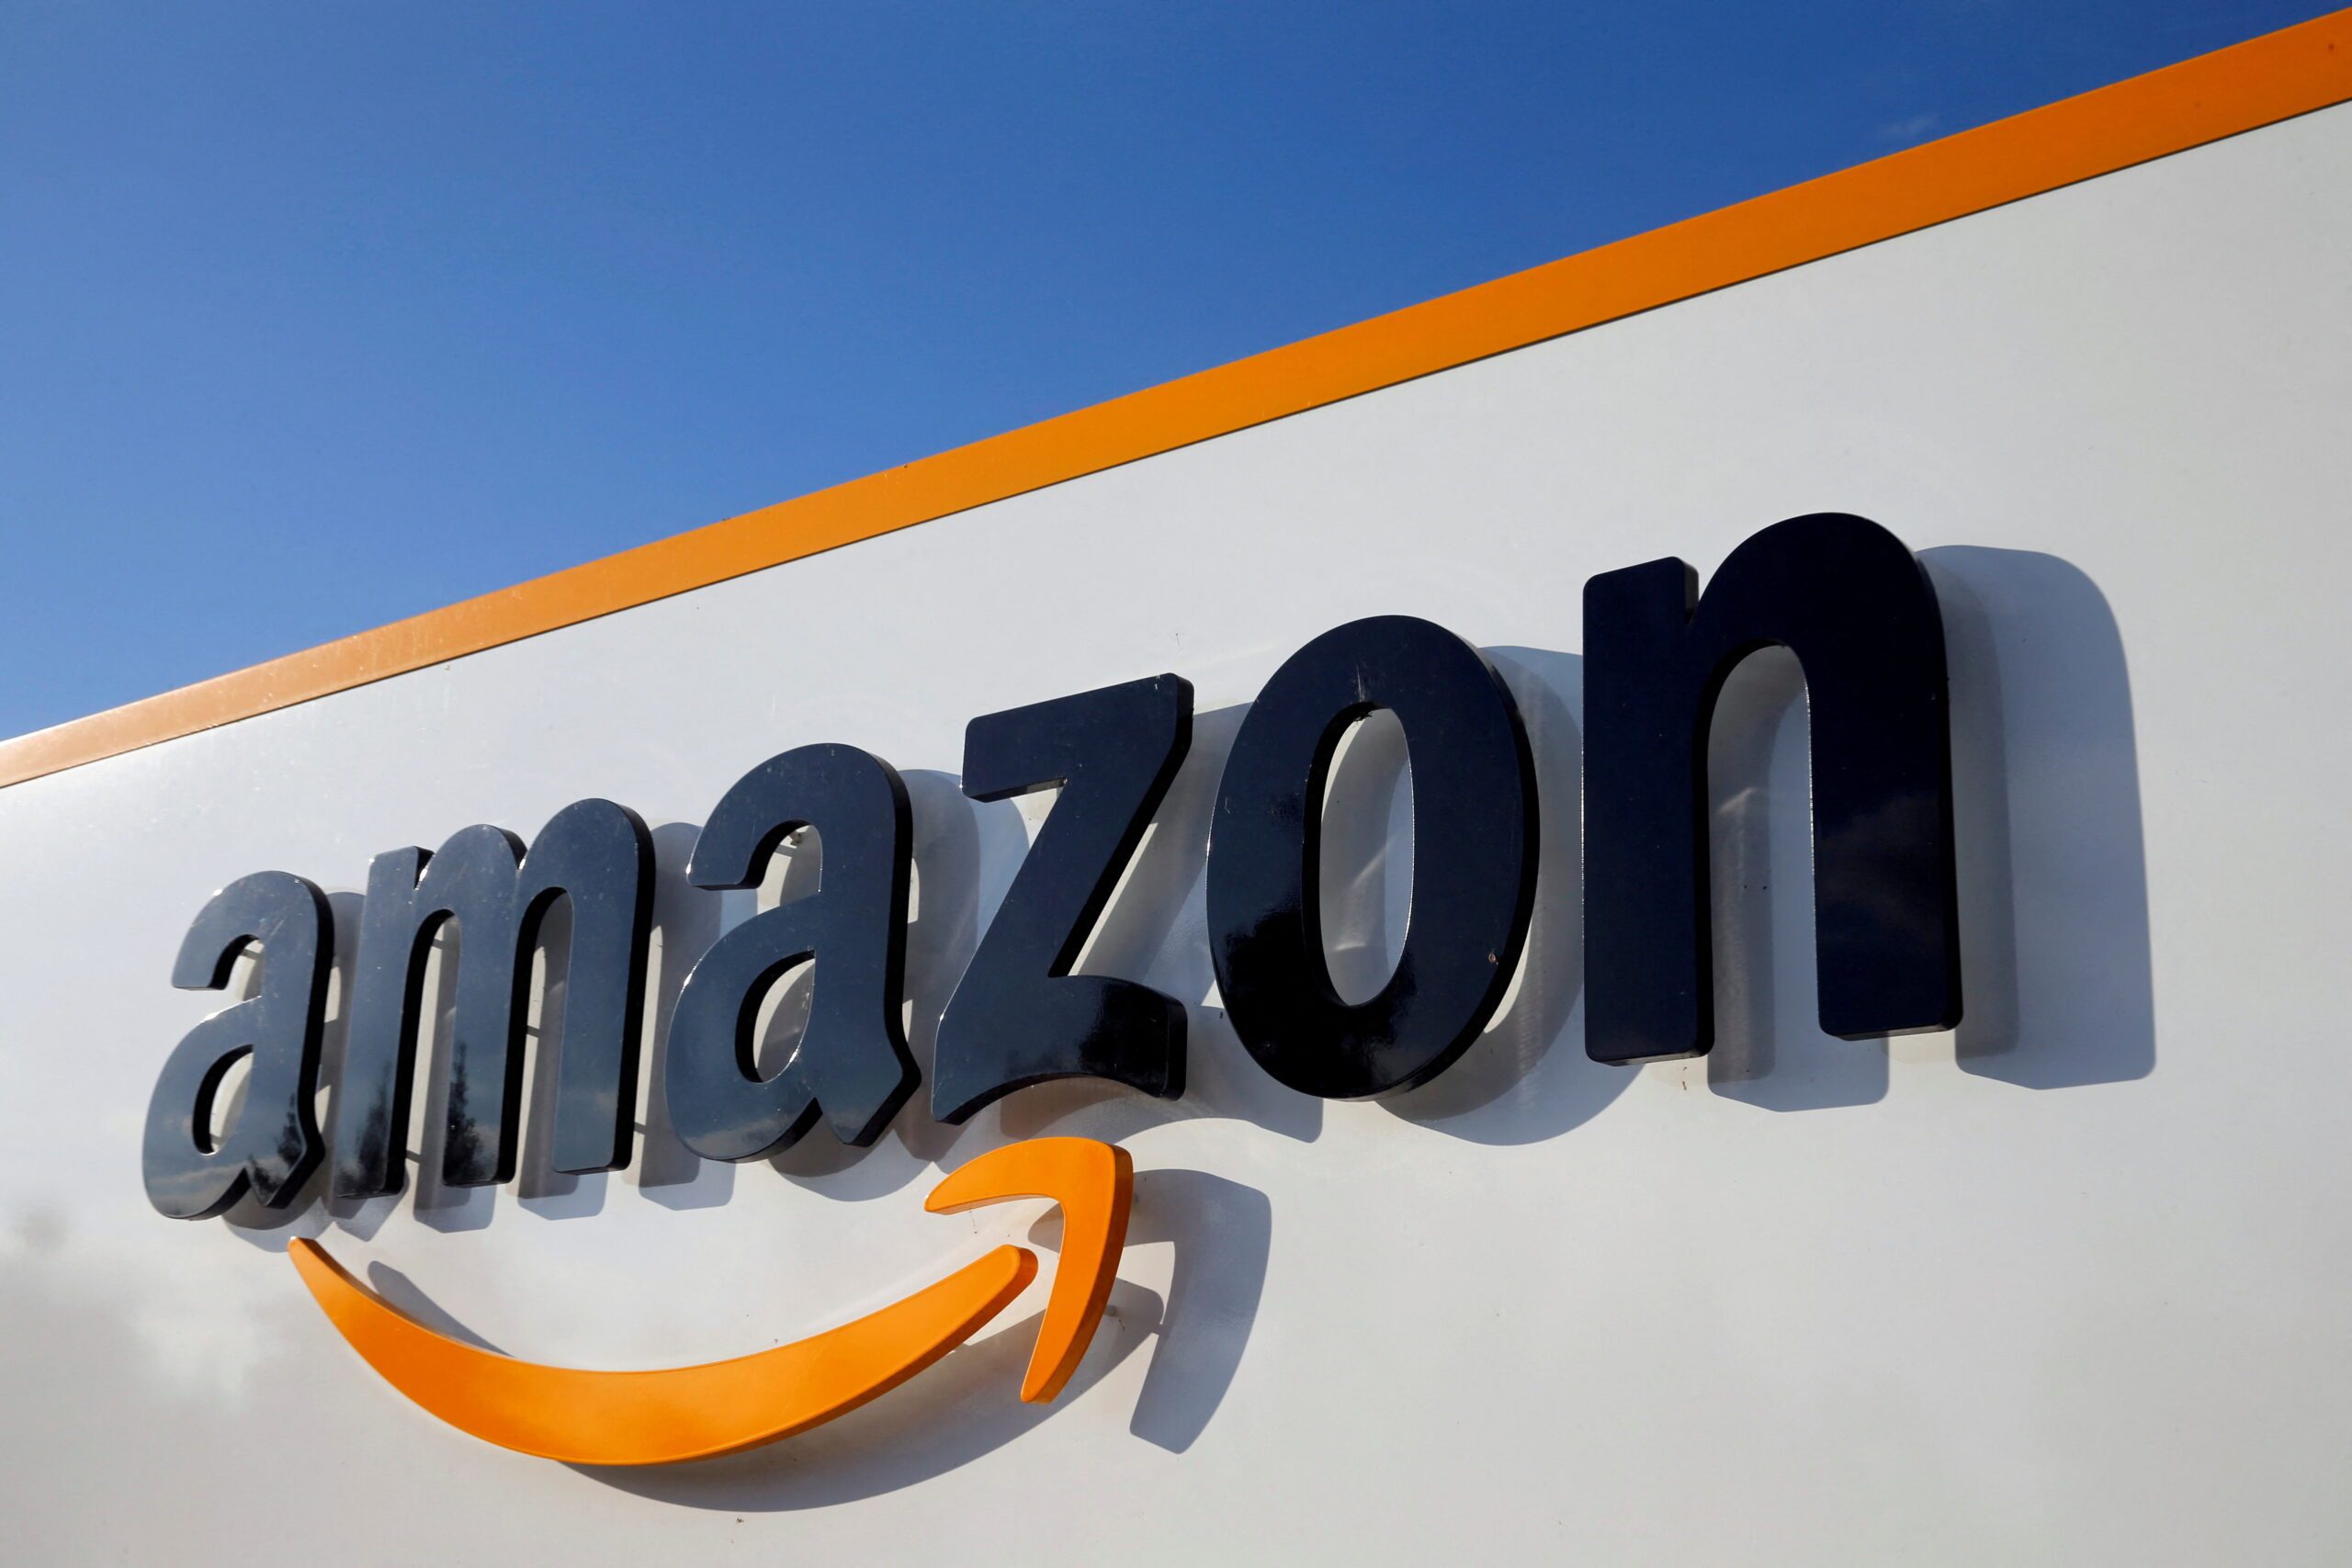 Amazon offers free shipping promo to Philippines